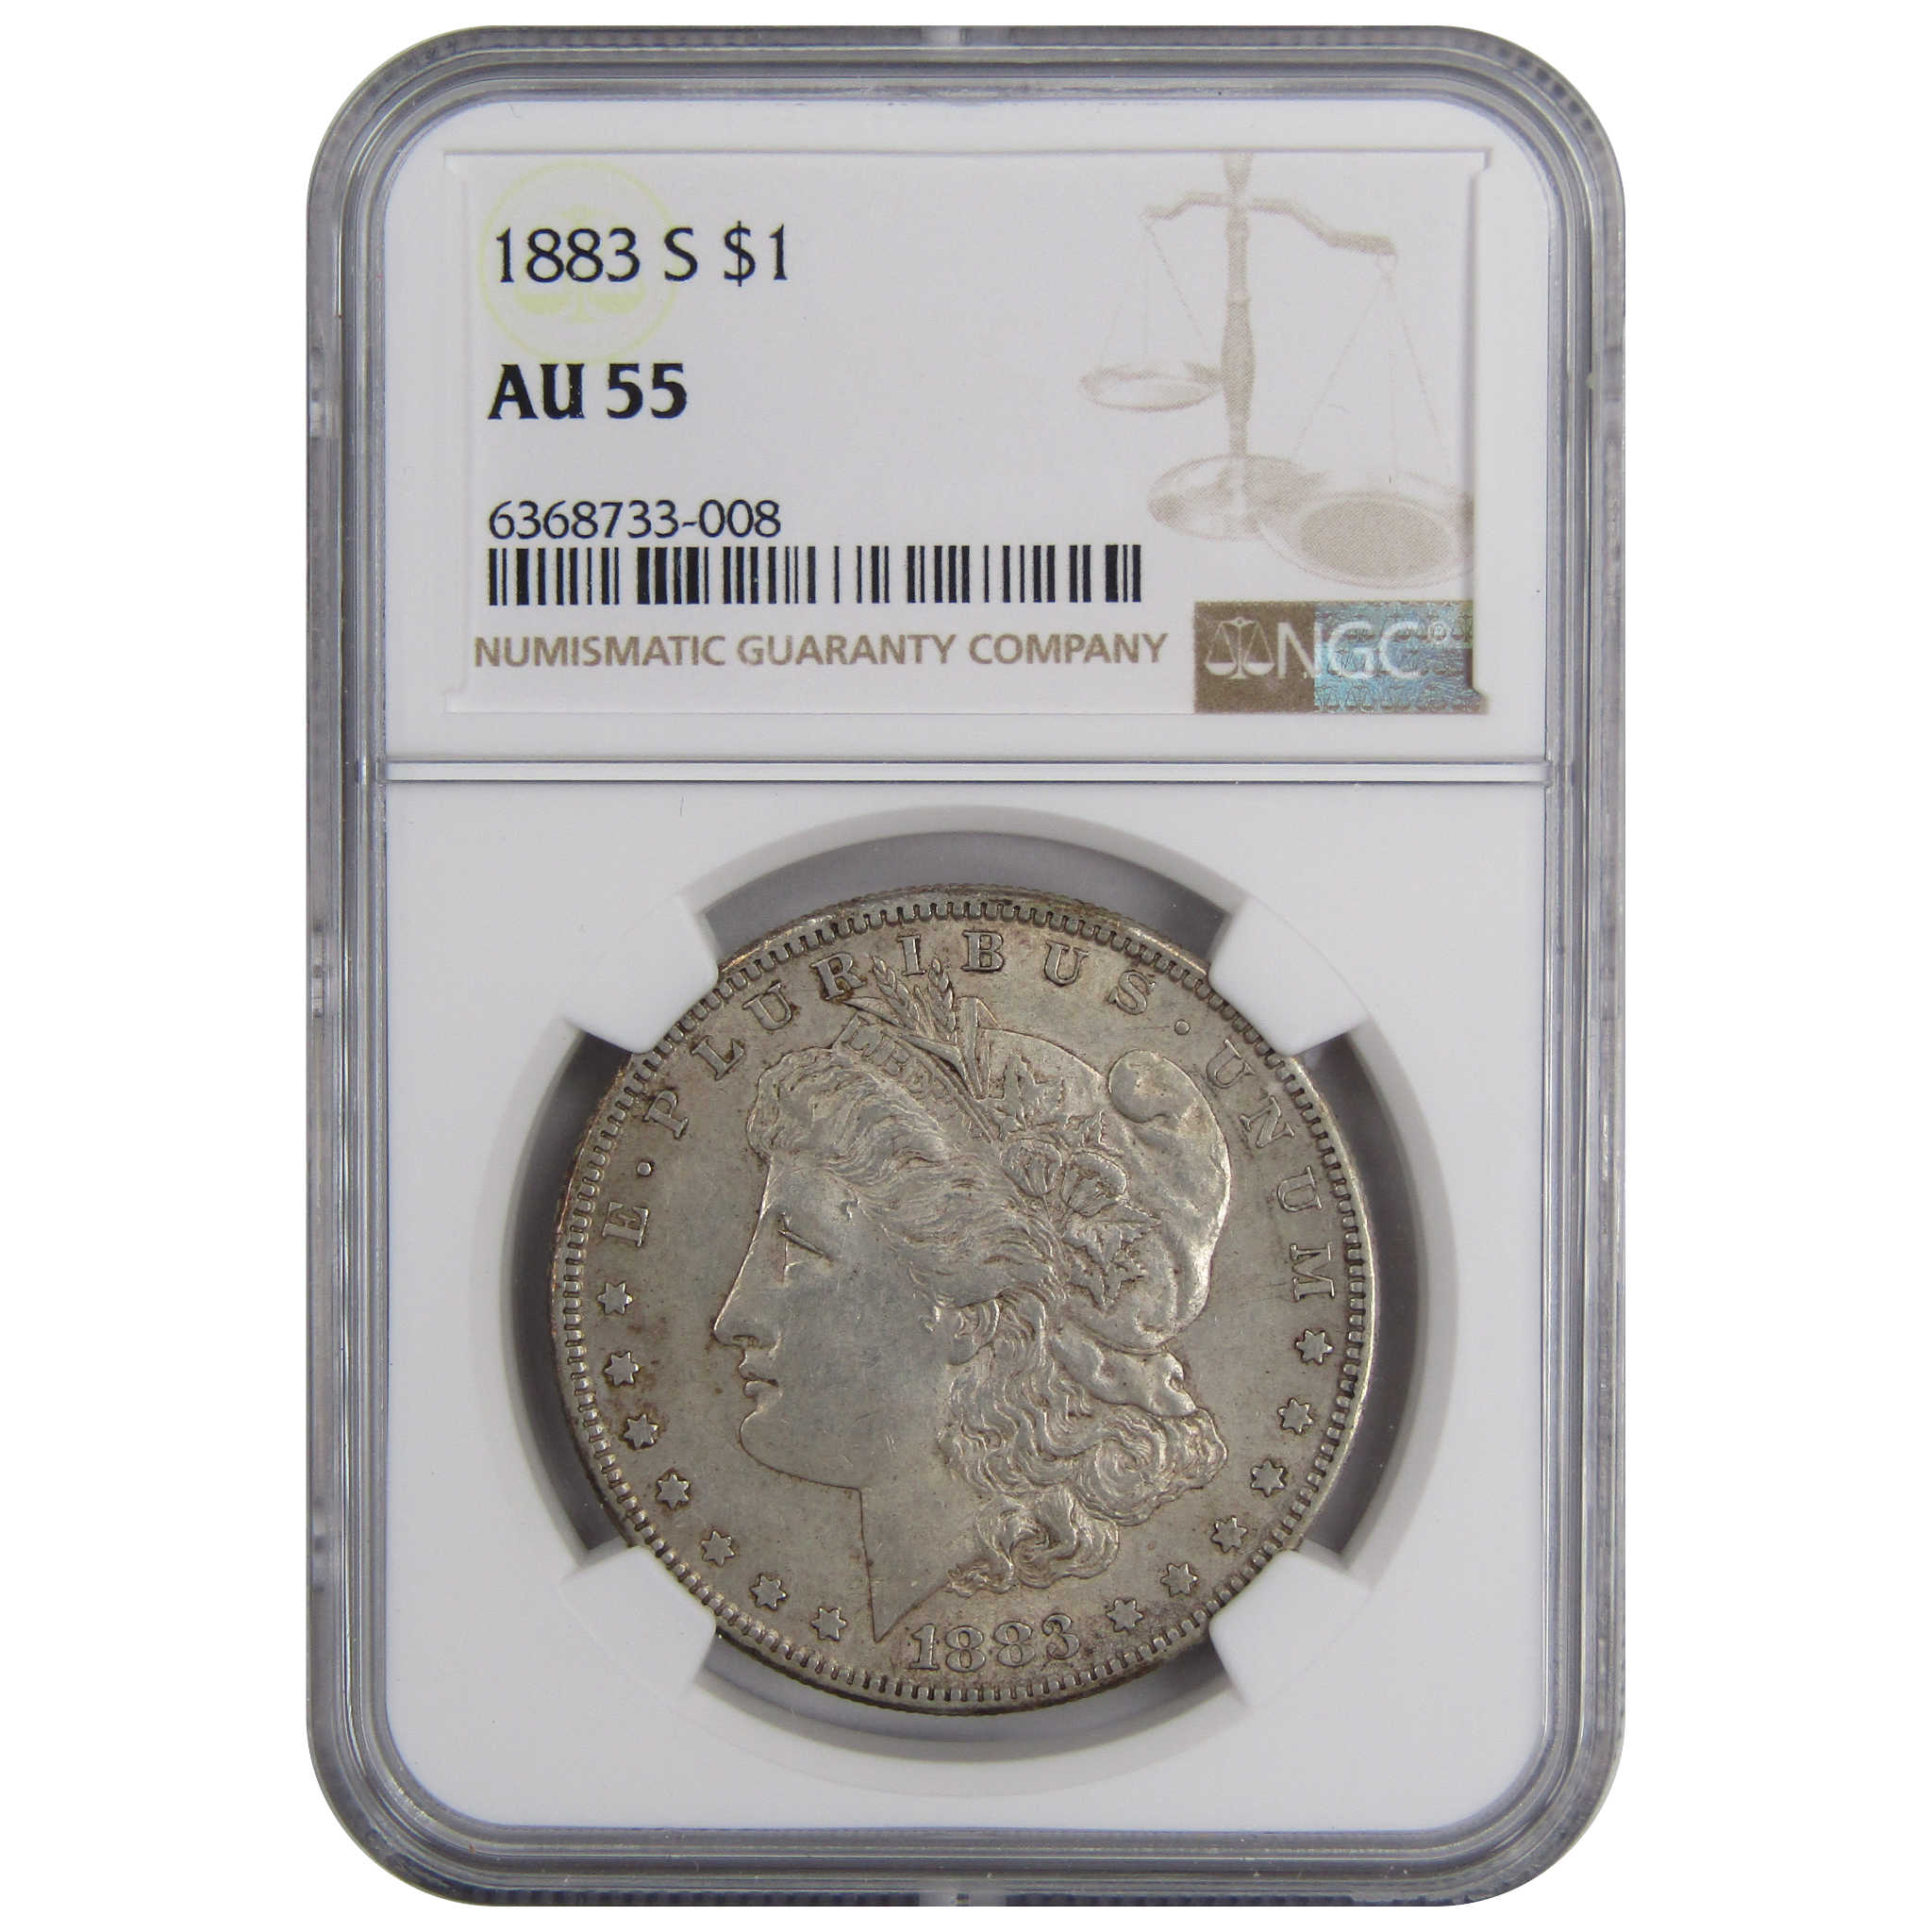 1883 S Morgan Dollar AU 55 NGC 90% Silver US Coin SKU:I2306 - Morgan coin - Morgan silver dollar - Morgan silver dollar for sale - Profile Coins &amp; Collectibles